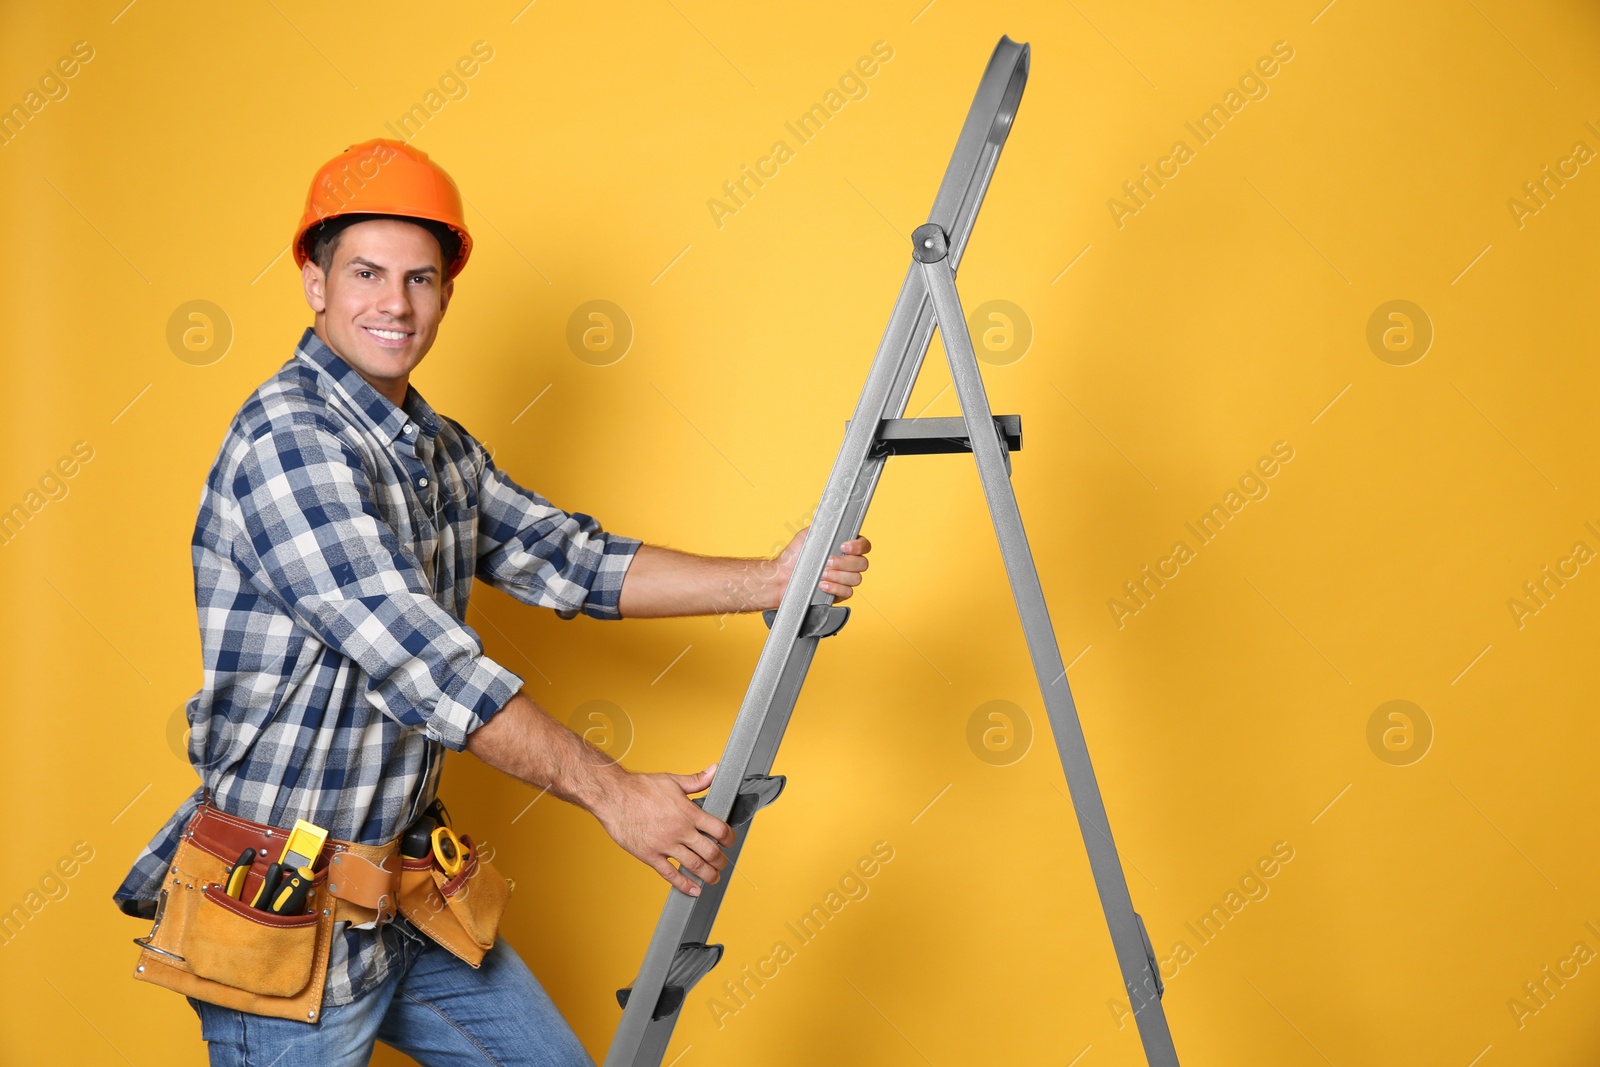 Photo of Professional builder climbing up metal ladder on yellow background